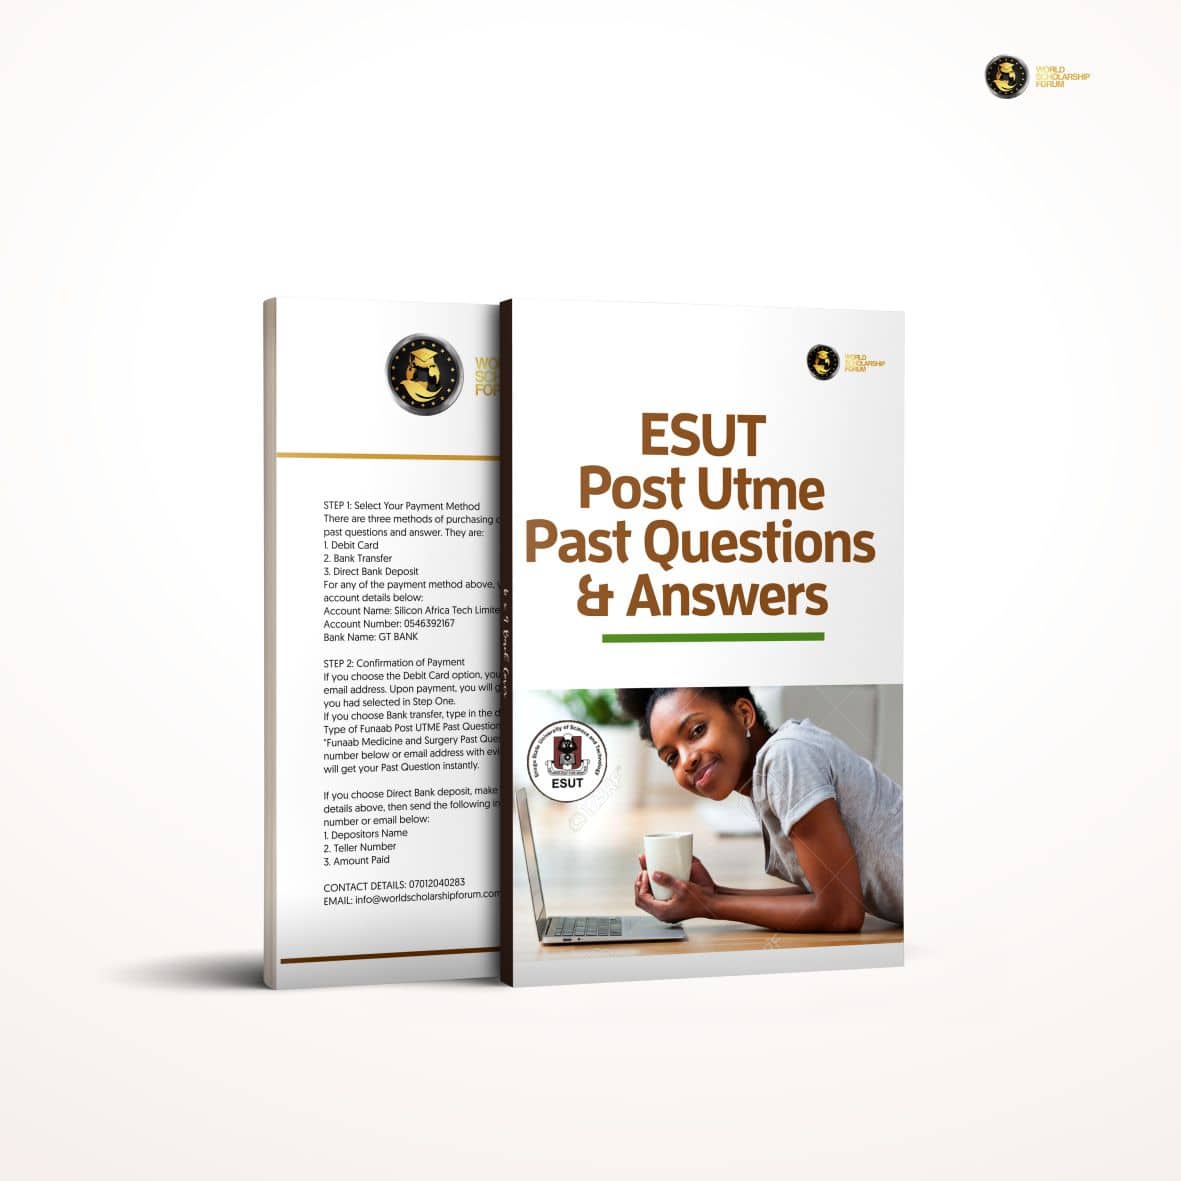 ESUT-POST-UTME-PAST-QUESTIONS-ANSWERS